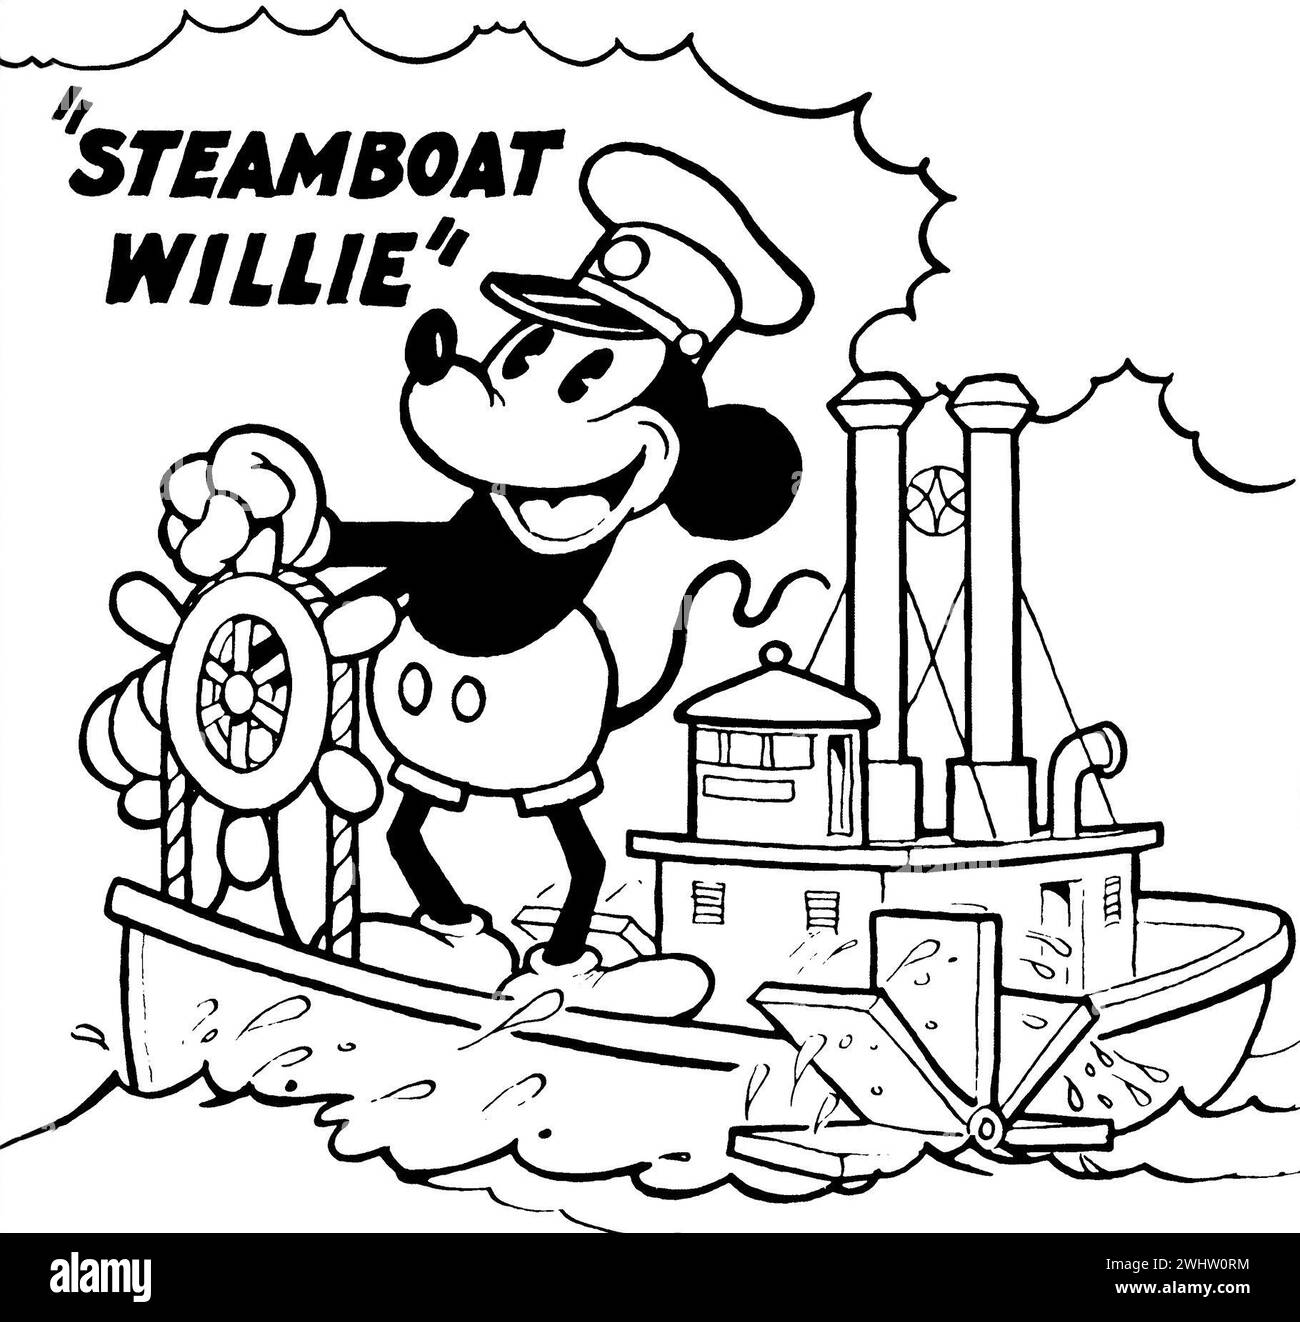 Steamboat Willie. Crop of an original Poster to the 1928 Cartoon, Steamboat Willie - Mickey Mouse's first animated short. Stock Photo